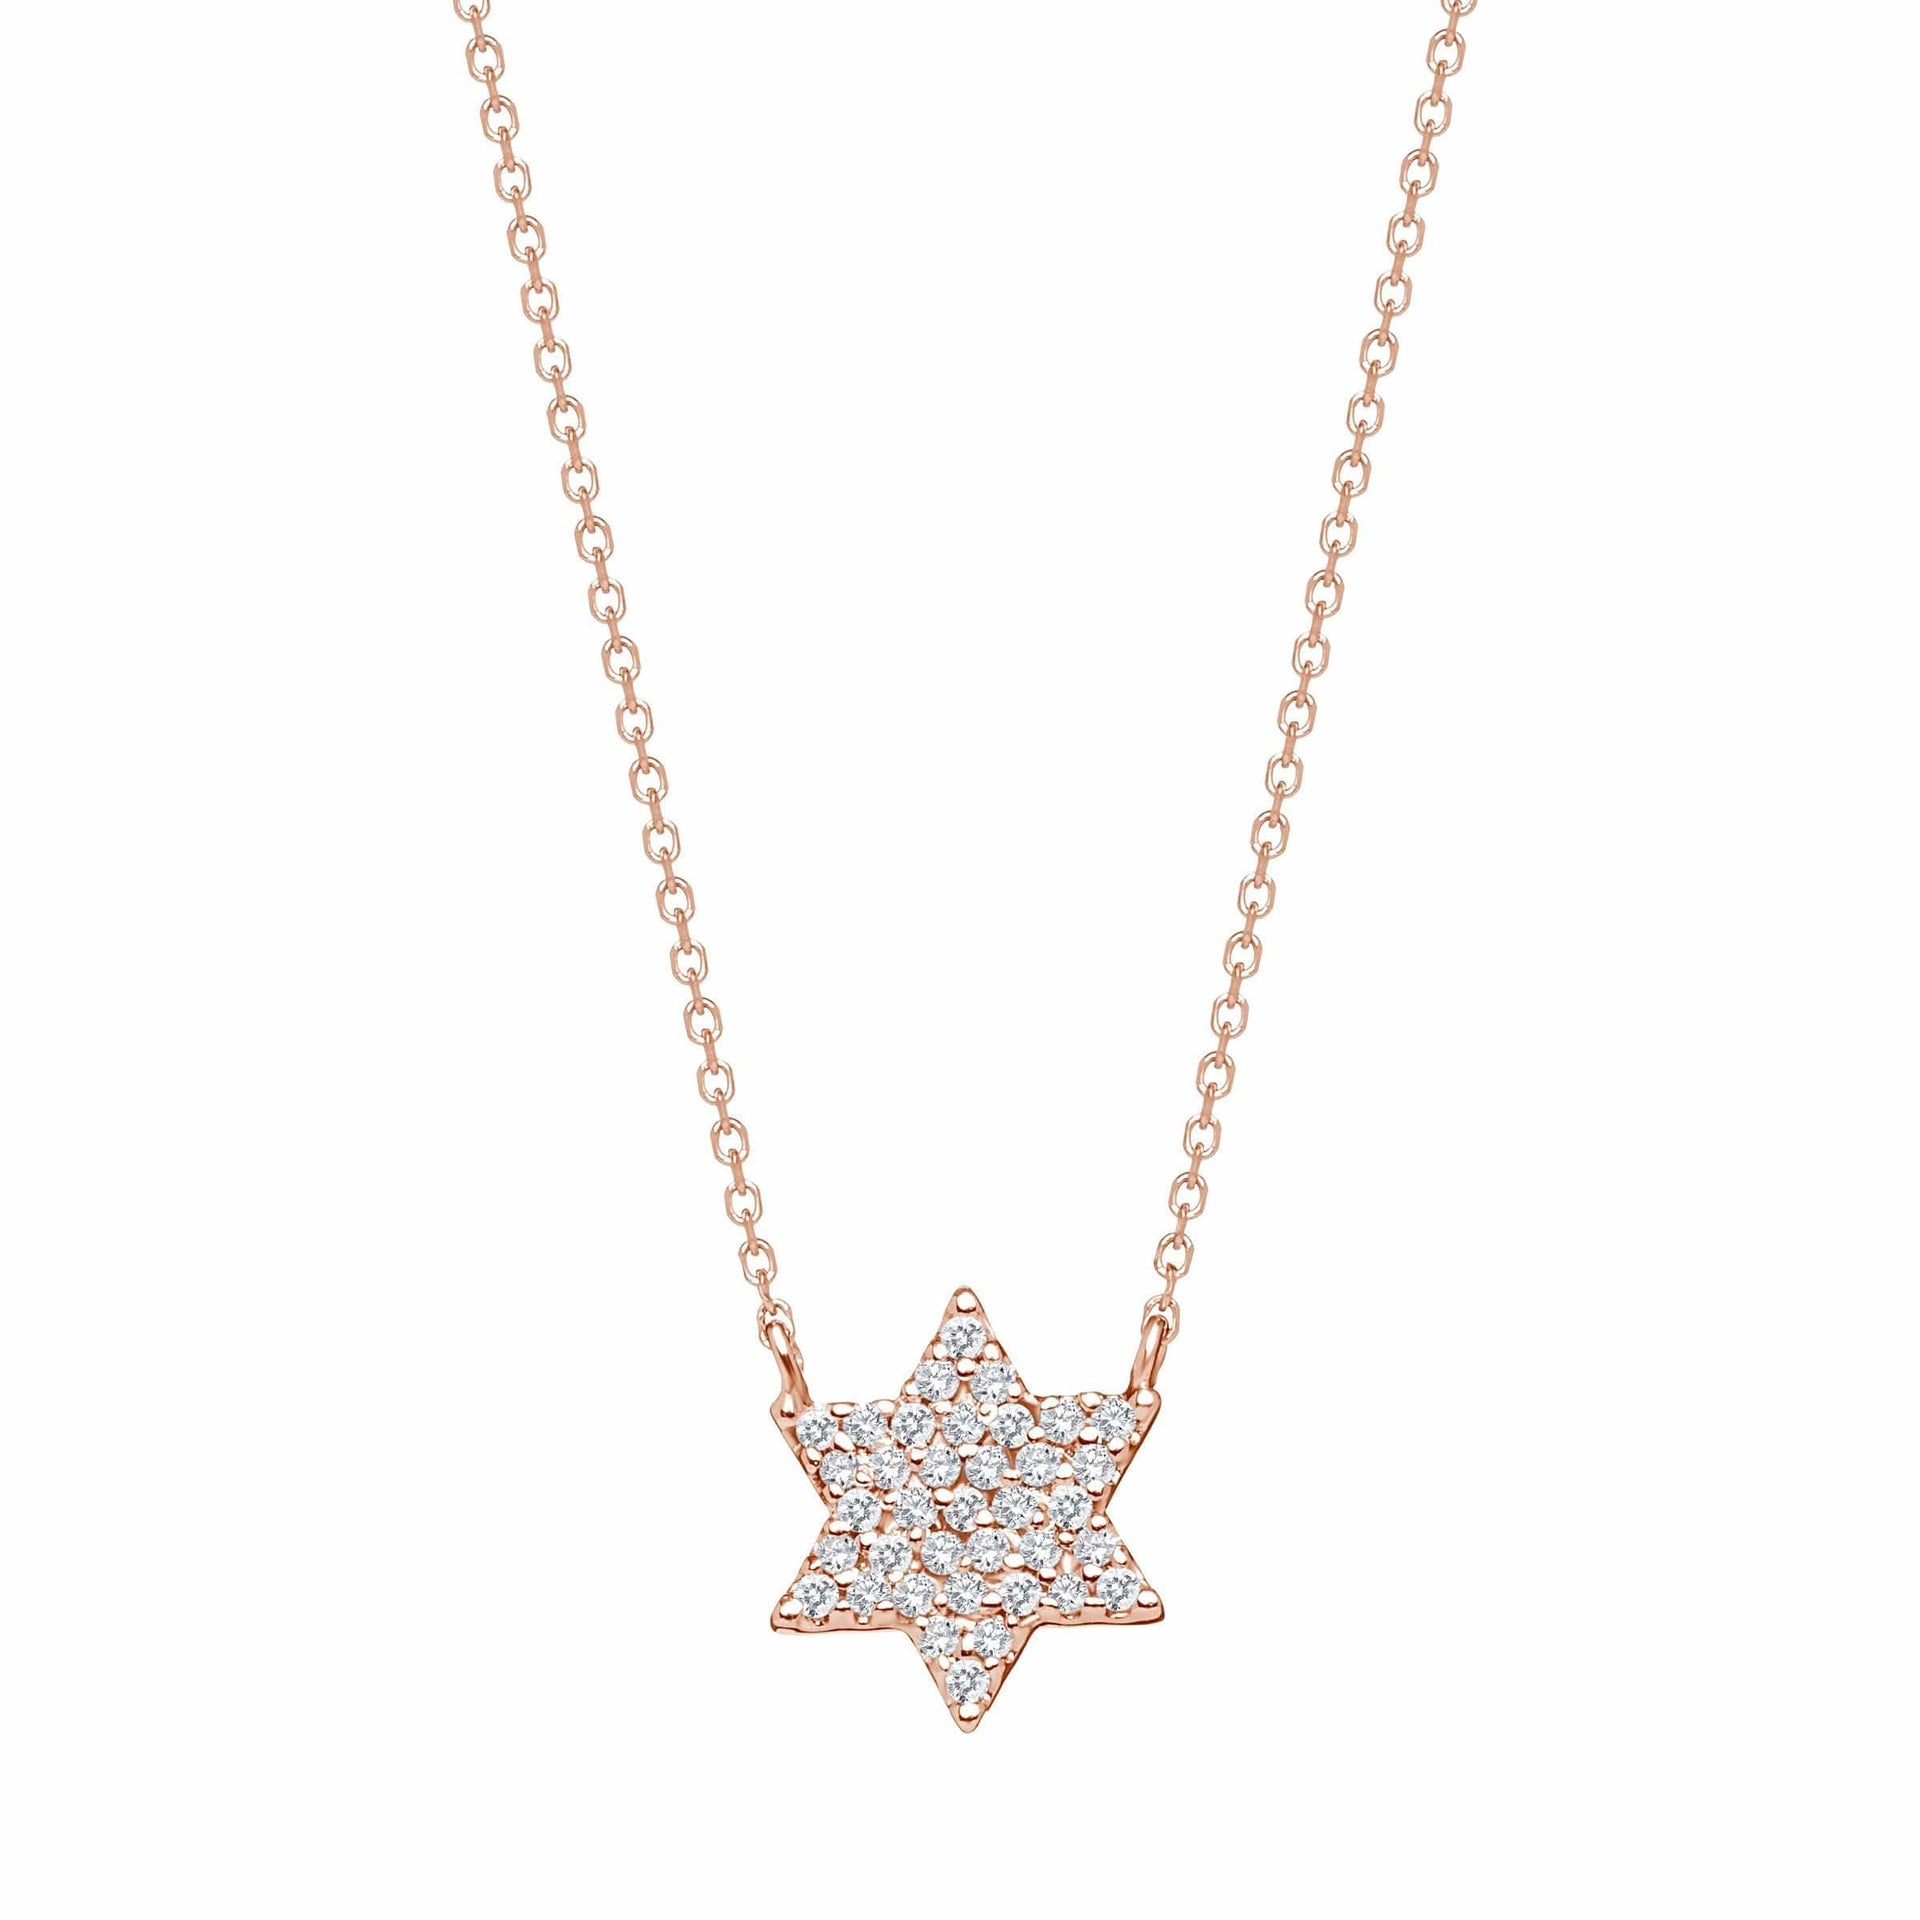 Alef Bet Necklaces Rose Gold Diamond Star of David Necklace - Gold, White Gold or Rose Gold